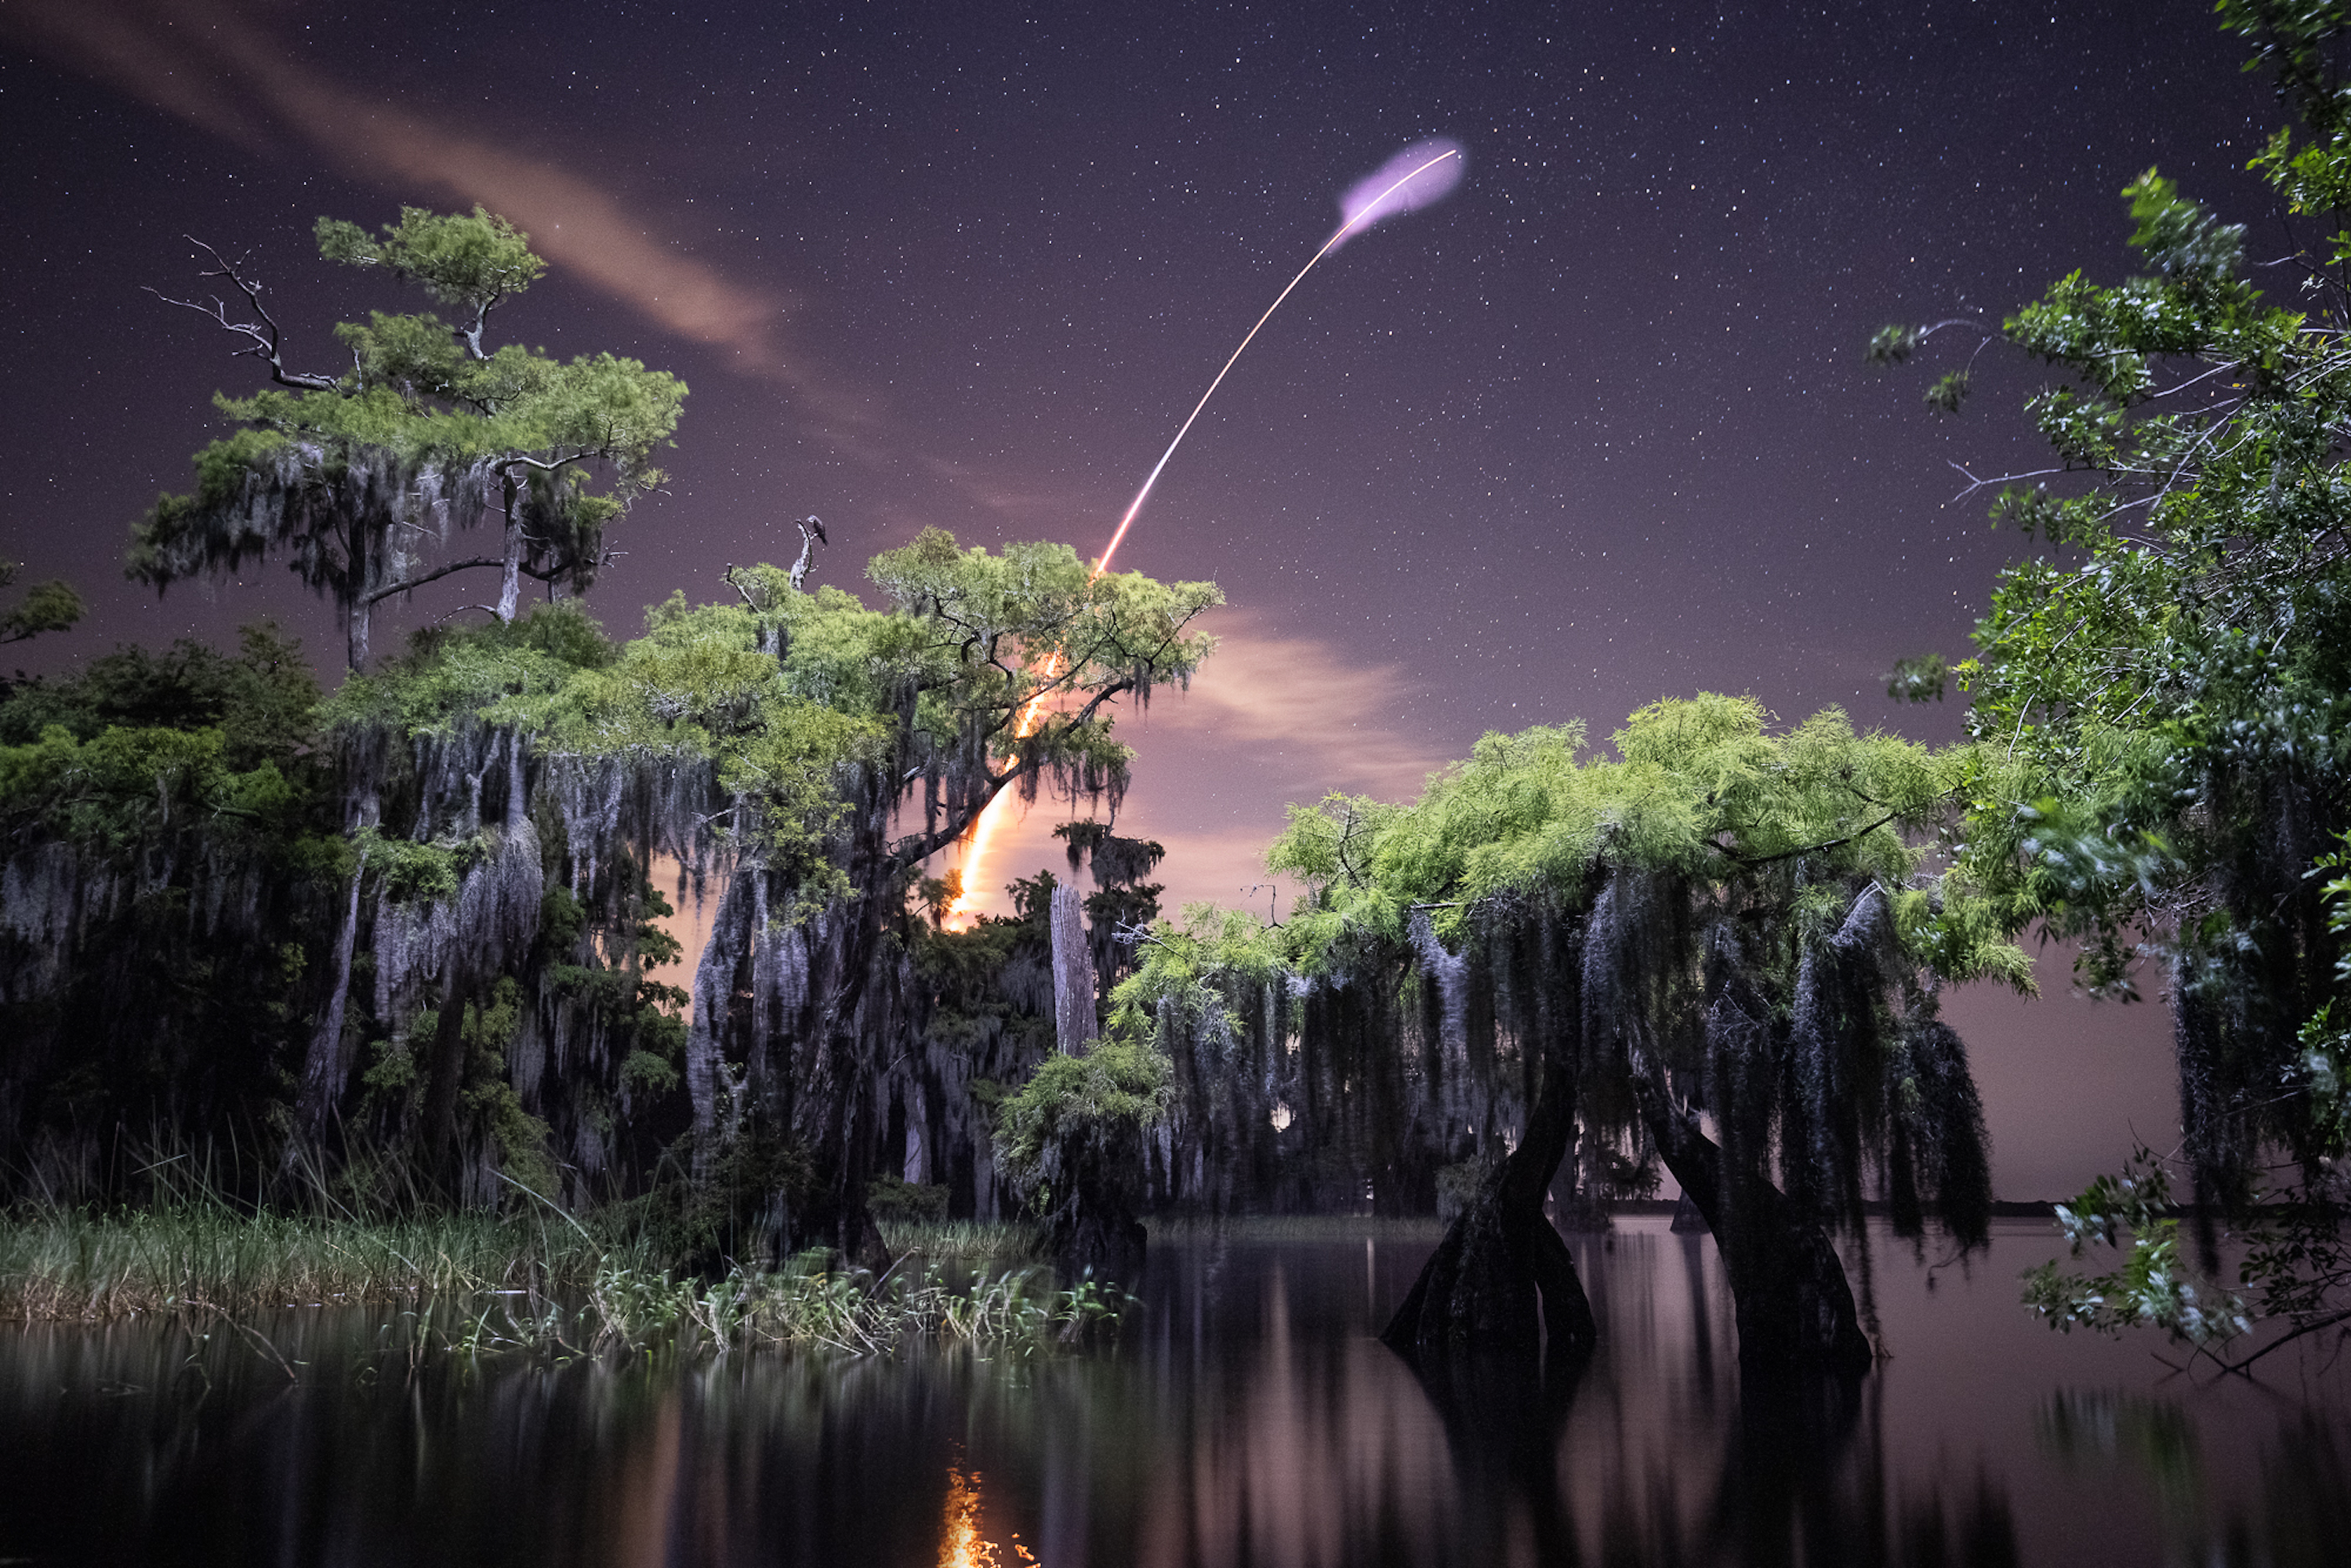 A Space X rocket launches above a cypress swamp